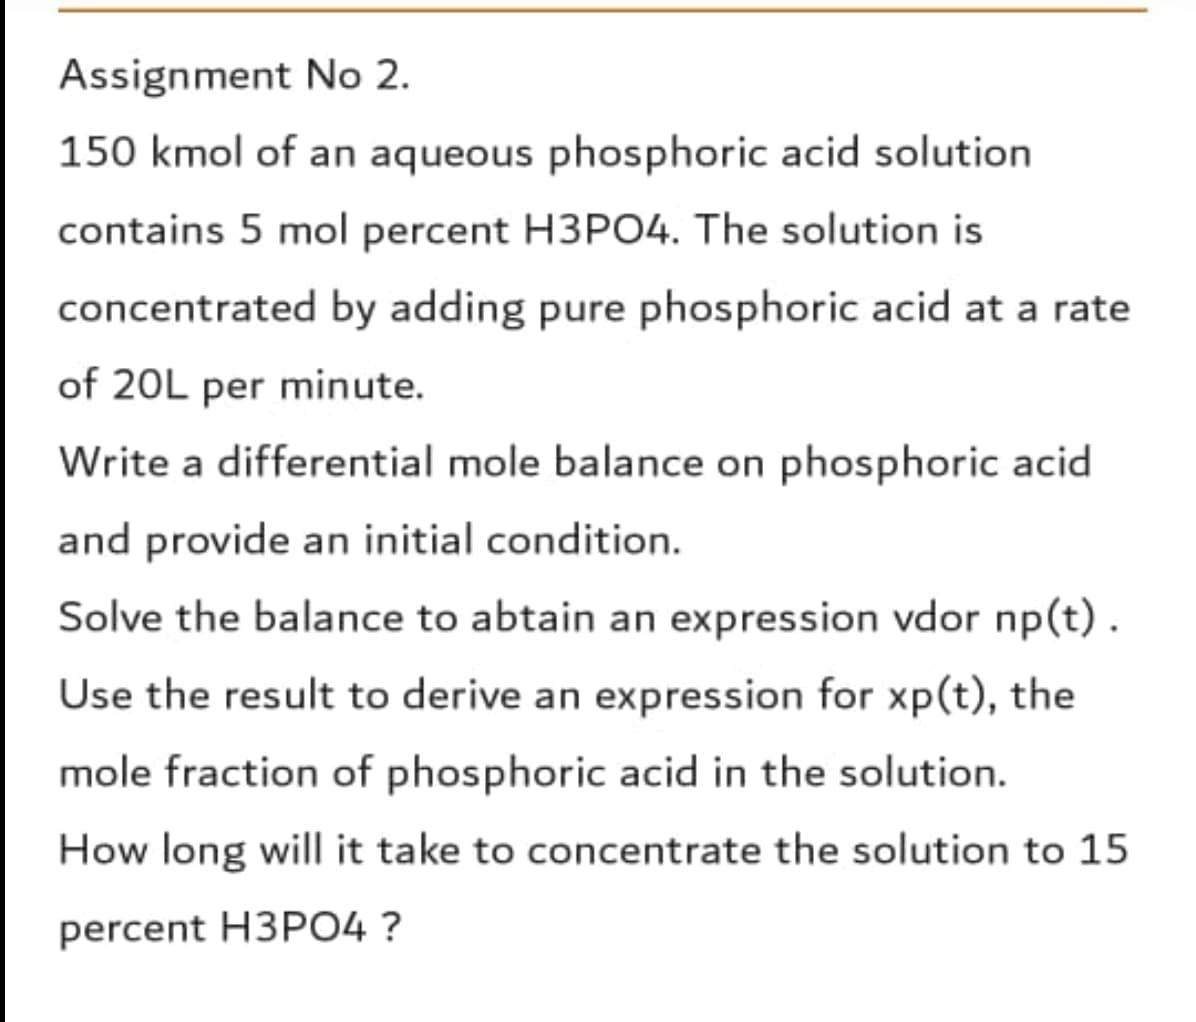 Assignment No 2.
150 kmol of an aqueous phosphoric acid solution
contains 5 mol percent H3PO4. The solution is
concentrated by adding pure phosphoric acid at a rate
of 20L per minute.
Write a differential mole balance on phosphoric acid
and provide an initial condition.
Solve the balance to abtain an expression vdor np(t).
Use the result to derive an expression for xp(t), the
mole fraction of phosphoric acid in the solution.
How long will it take to concentrate the solution to 15
percent H3PO4 ?
